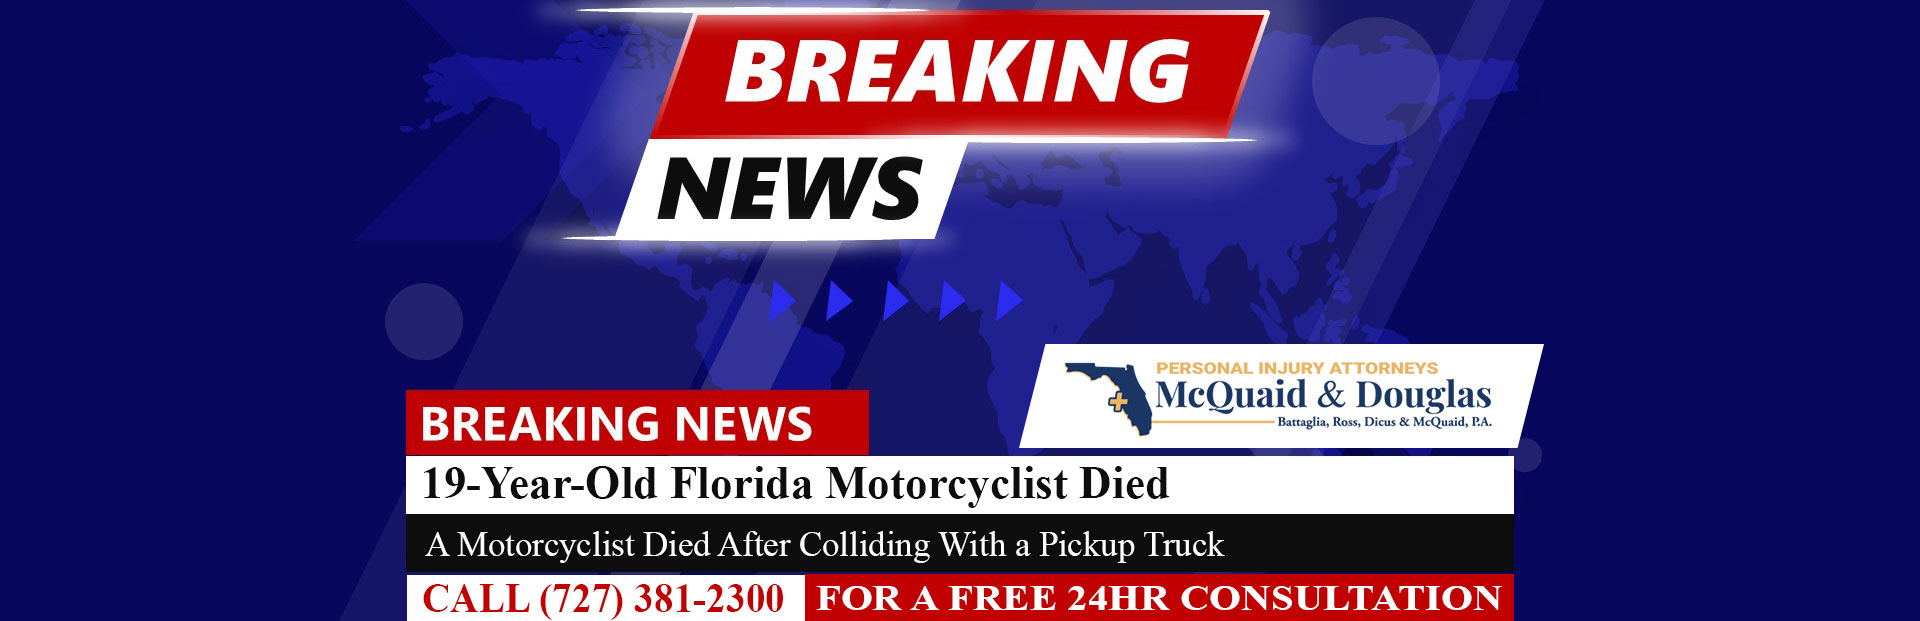 [05-19-23] 19-Year-Old Florida Motorcyclist Dies After Colliding With Pickup Truck